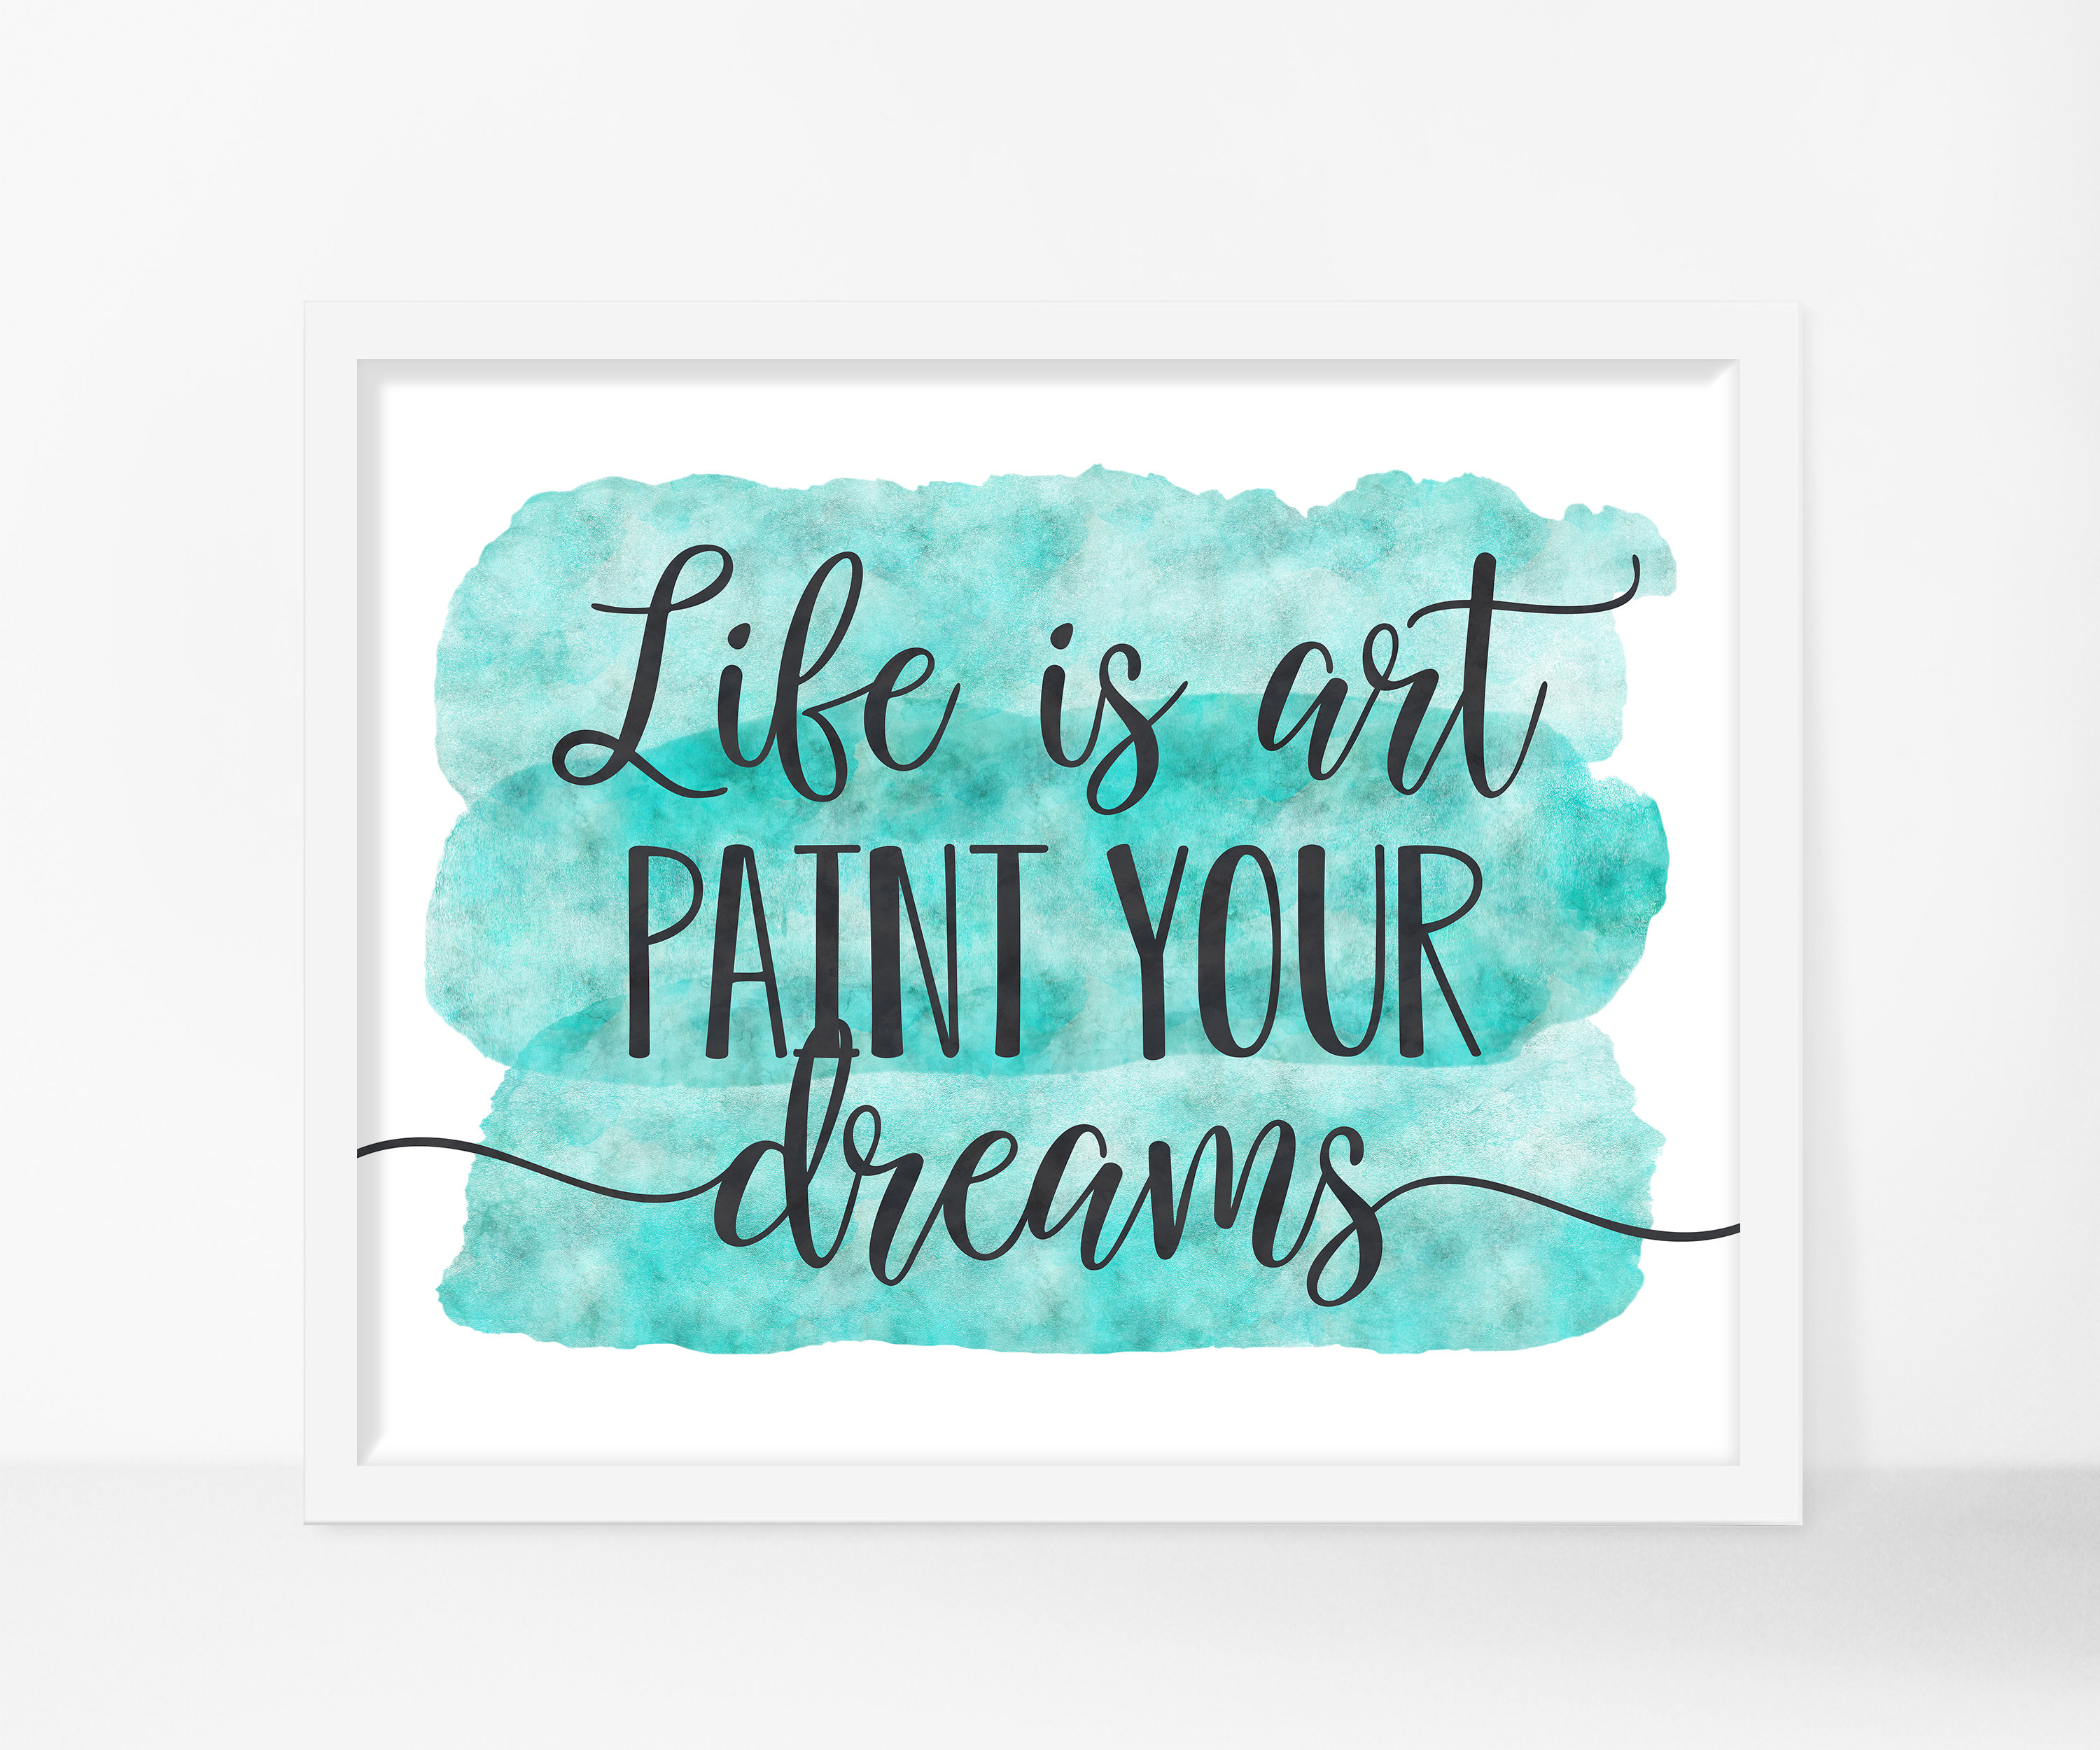 Life Is Art Paint Your Dreams, Inspirational Motivational Quotes,Wall Art Prints